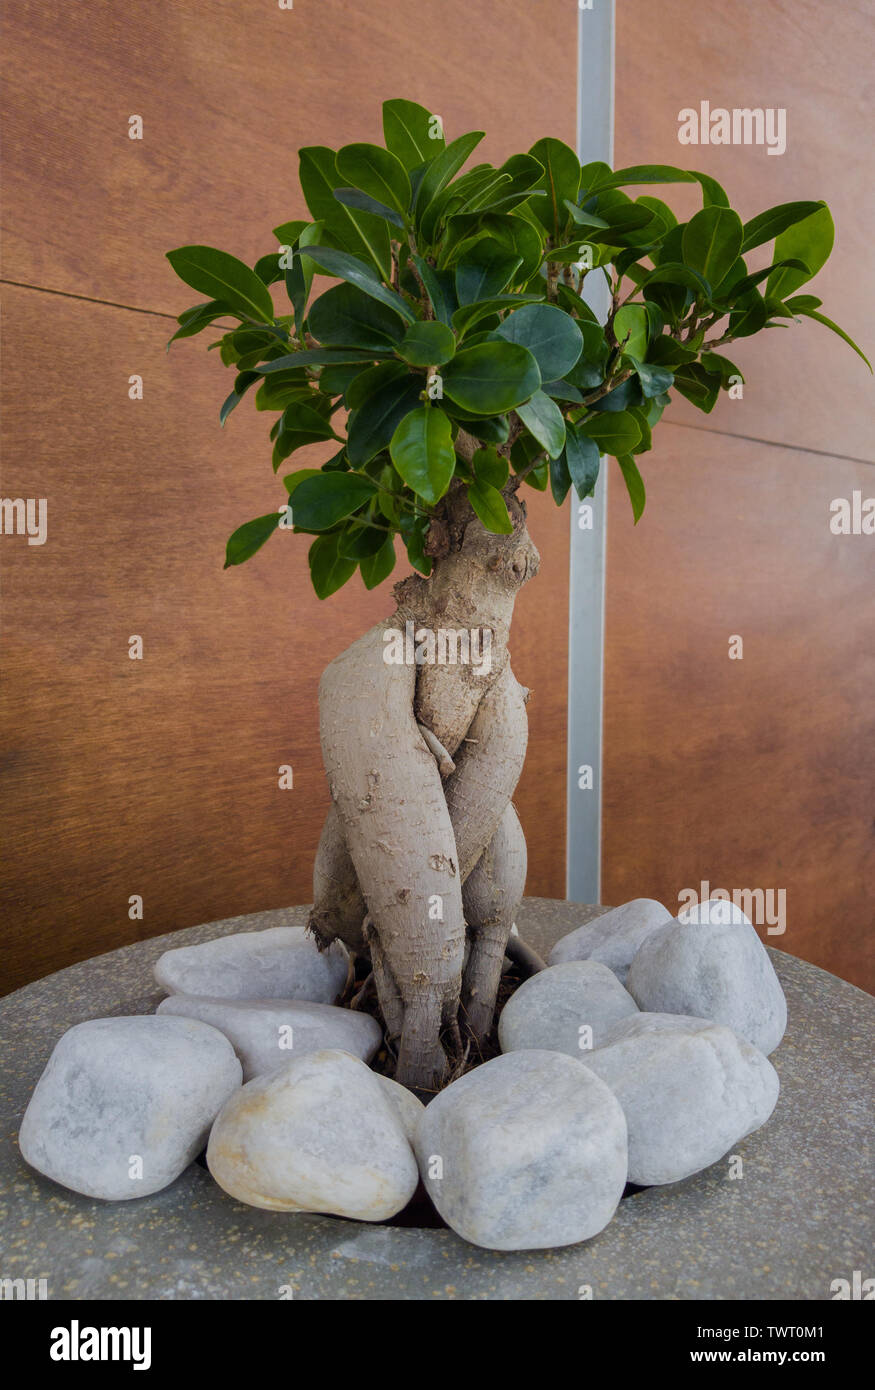 Decorative ficus decorated with stones. Tree bonsai with twisted trunk. Stock Photo